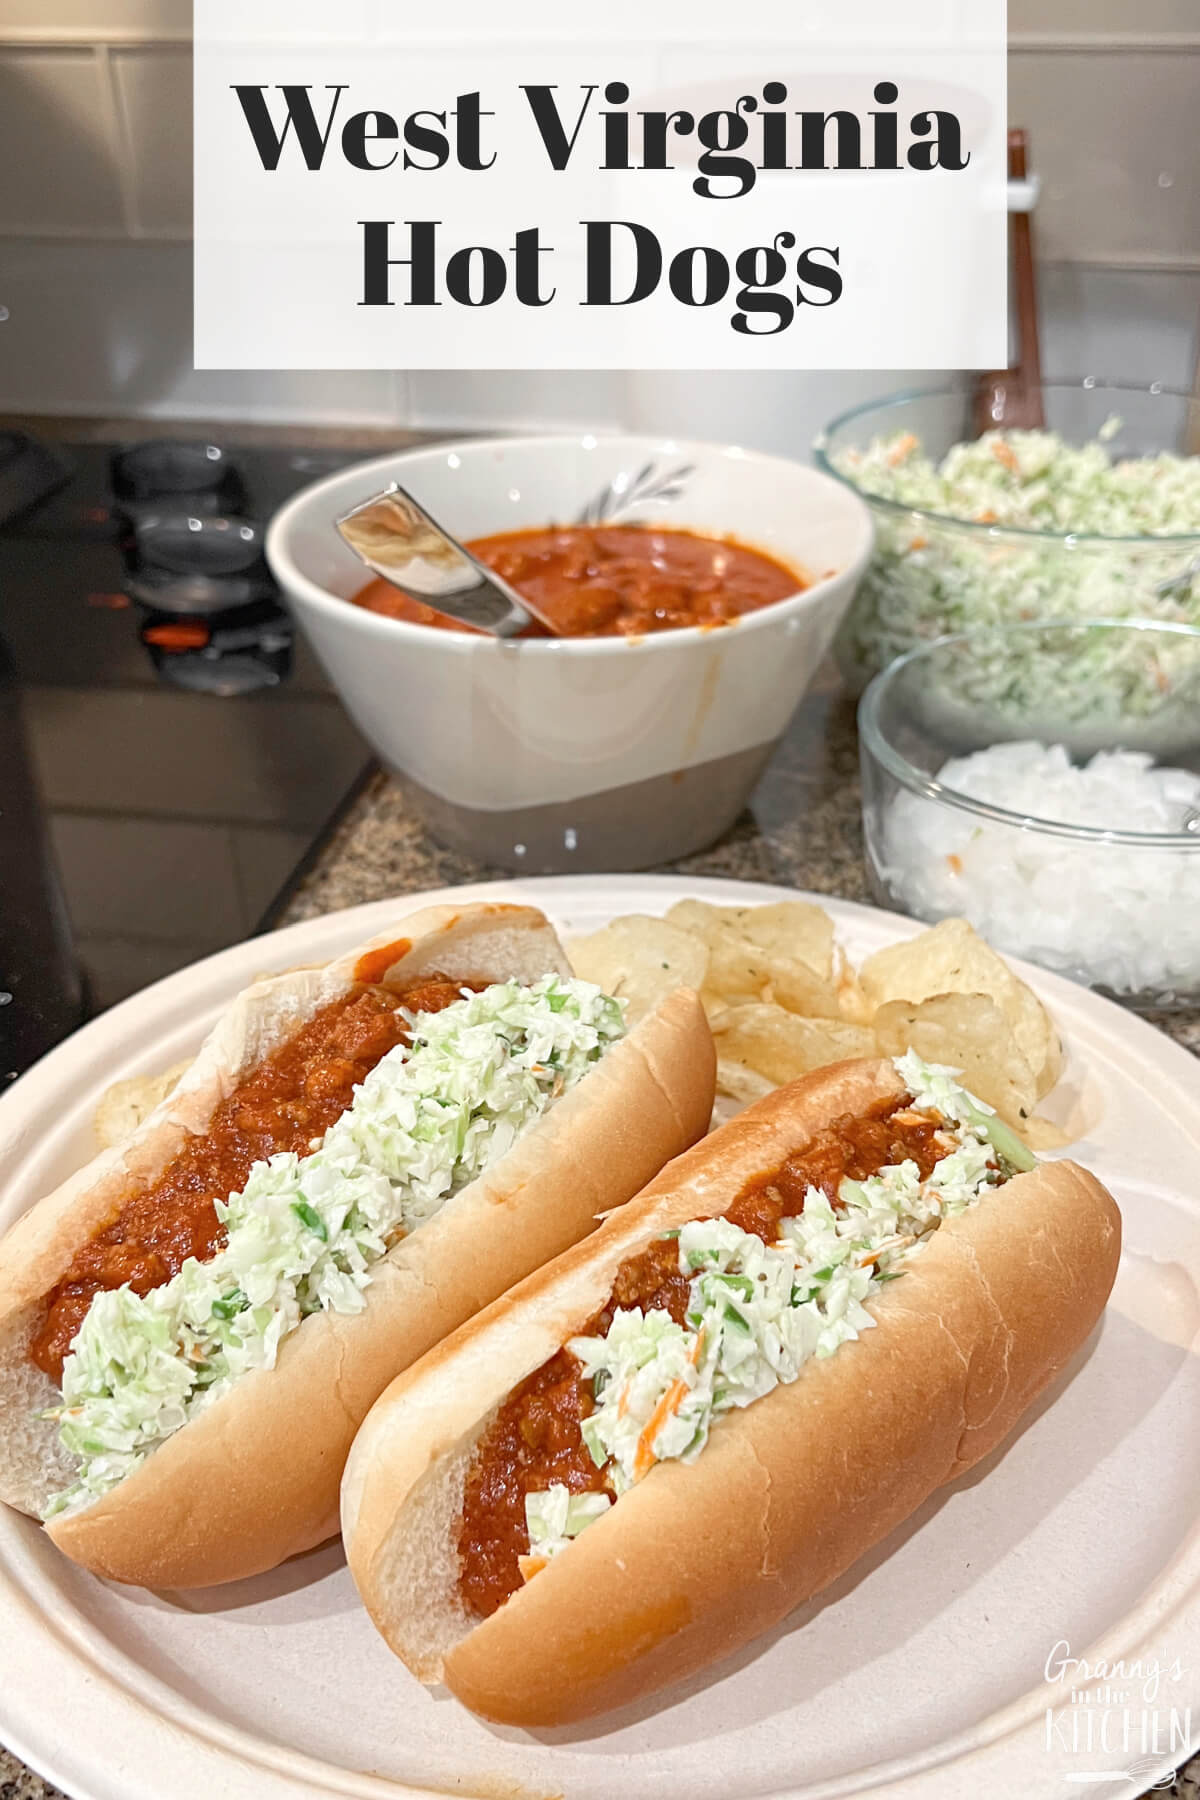 two hot dogs topped with chili and slaw, text overlay "West Virginia Hot Dogs".